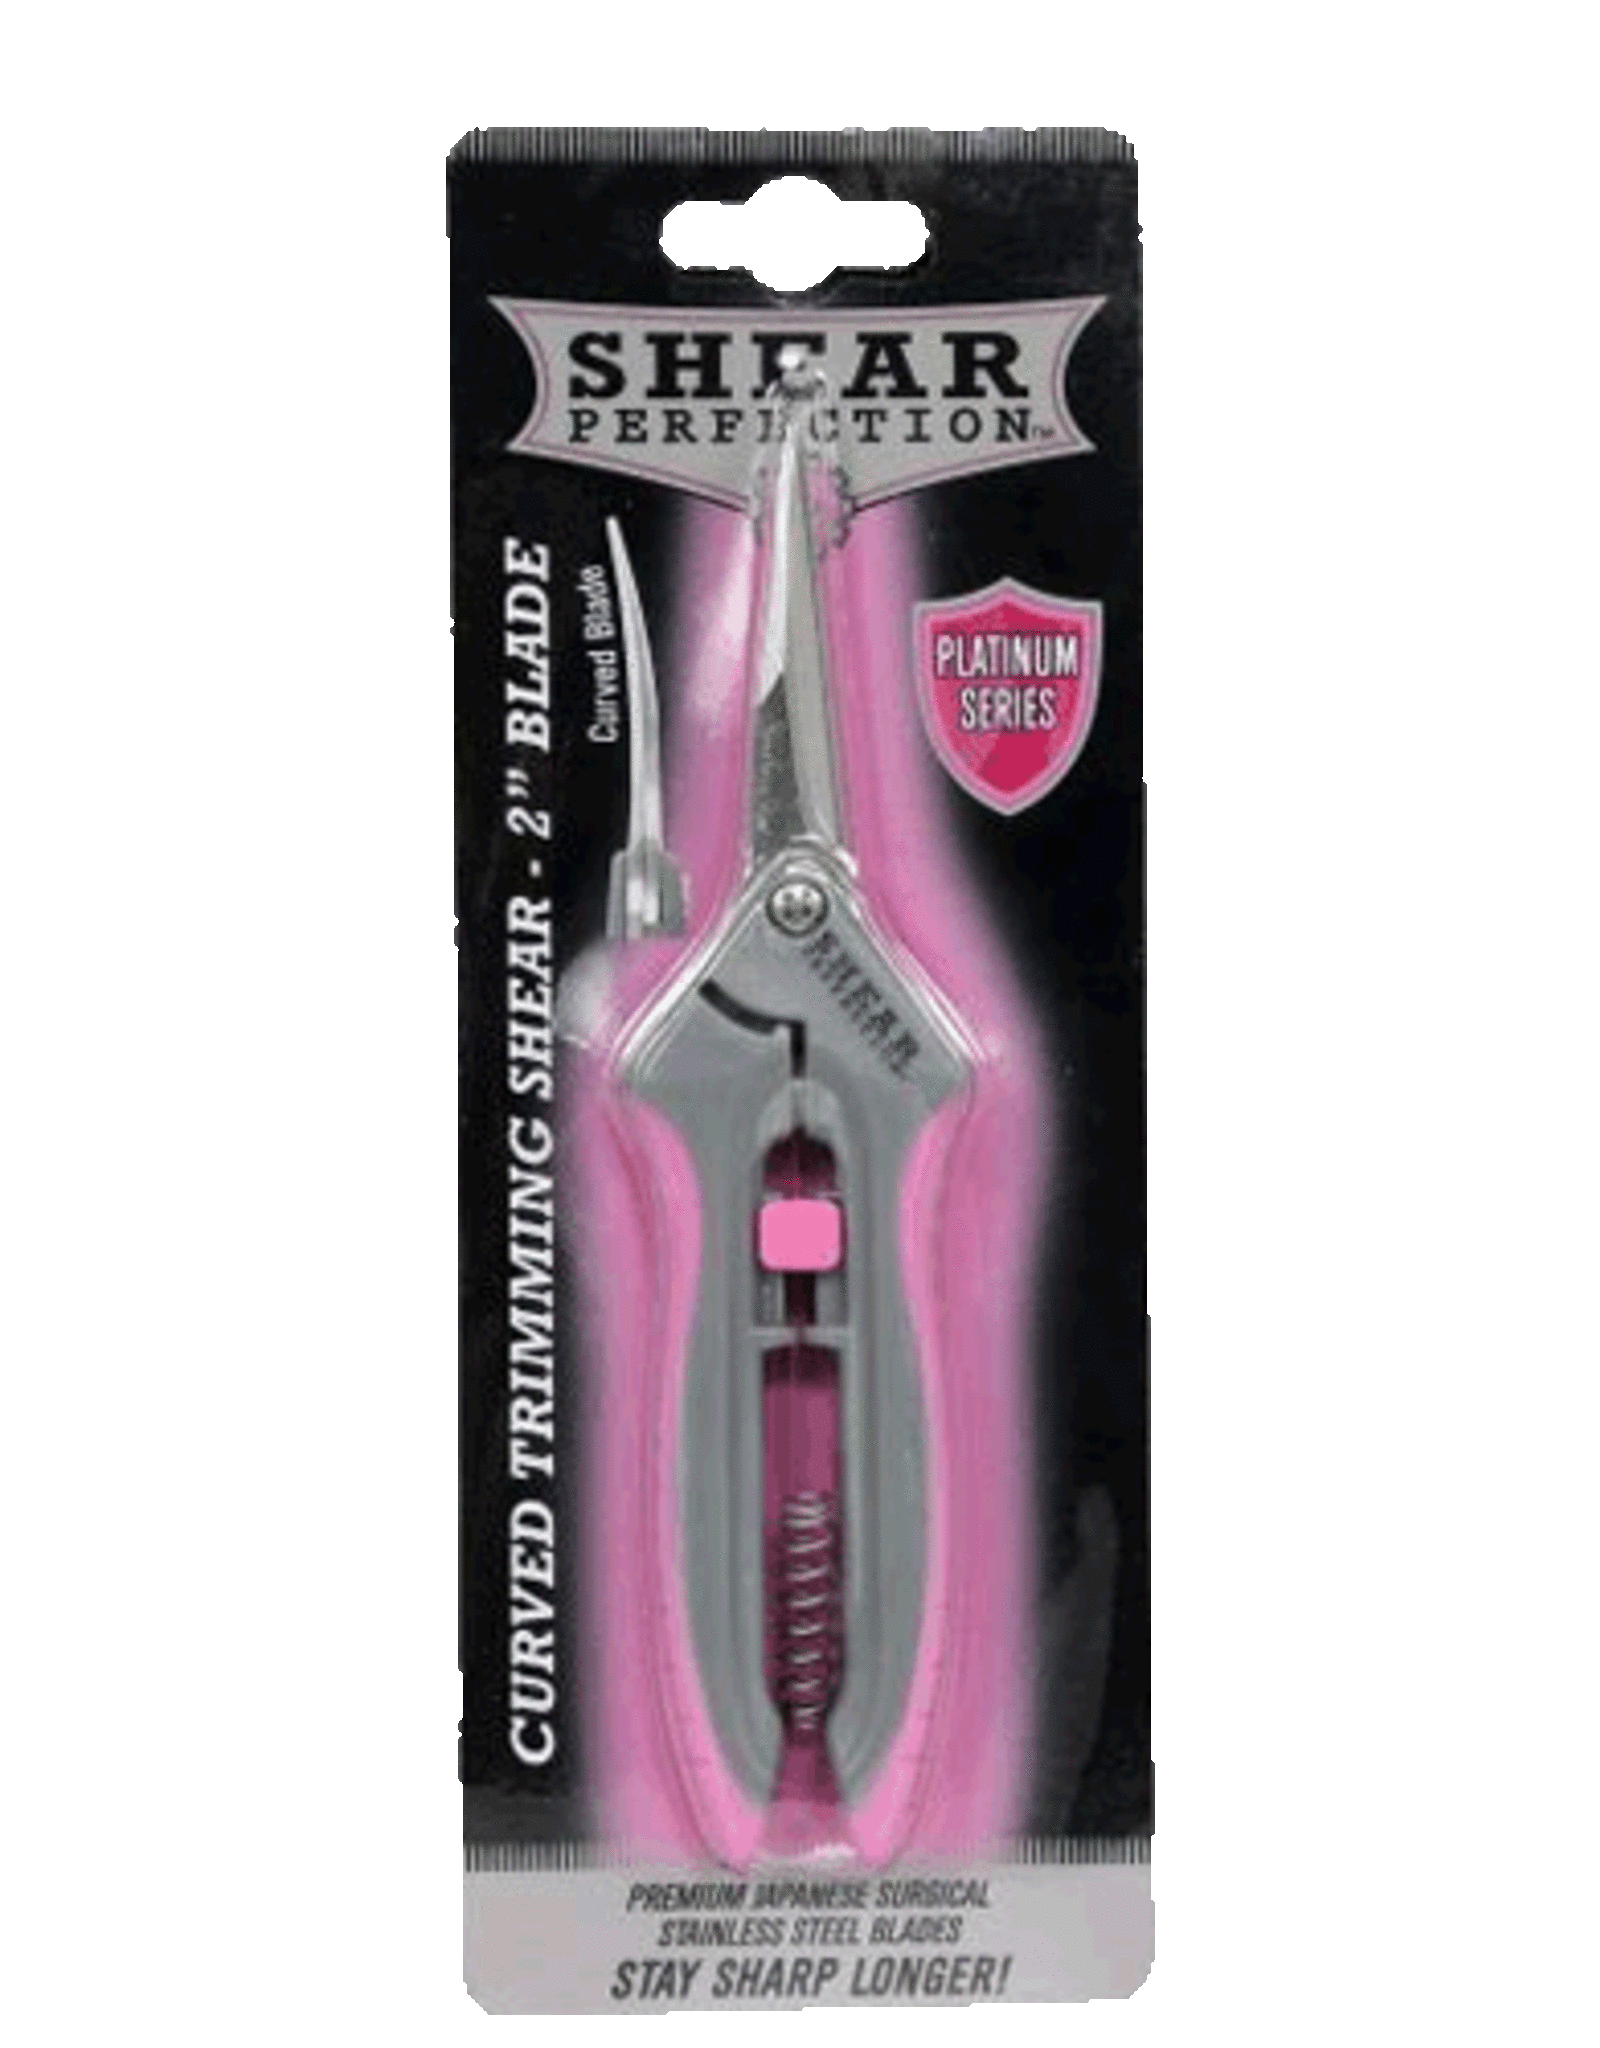 Shear Perfection Shear Perfection Pink Platinum Stainless Trimming Shear - 2 in Curved Blades